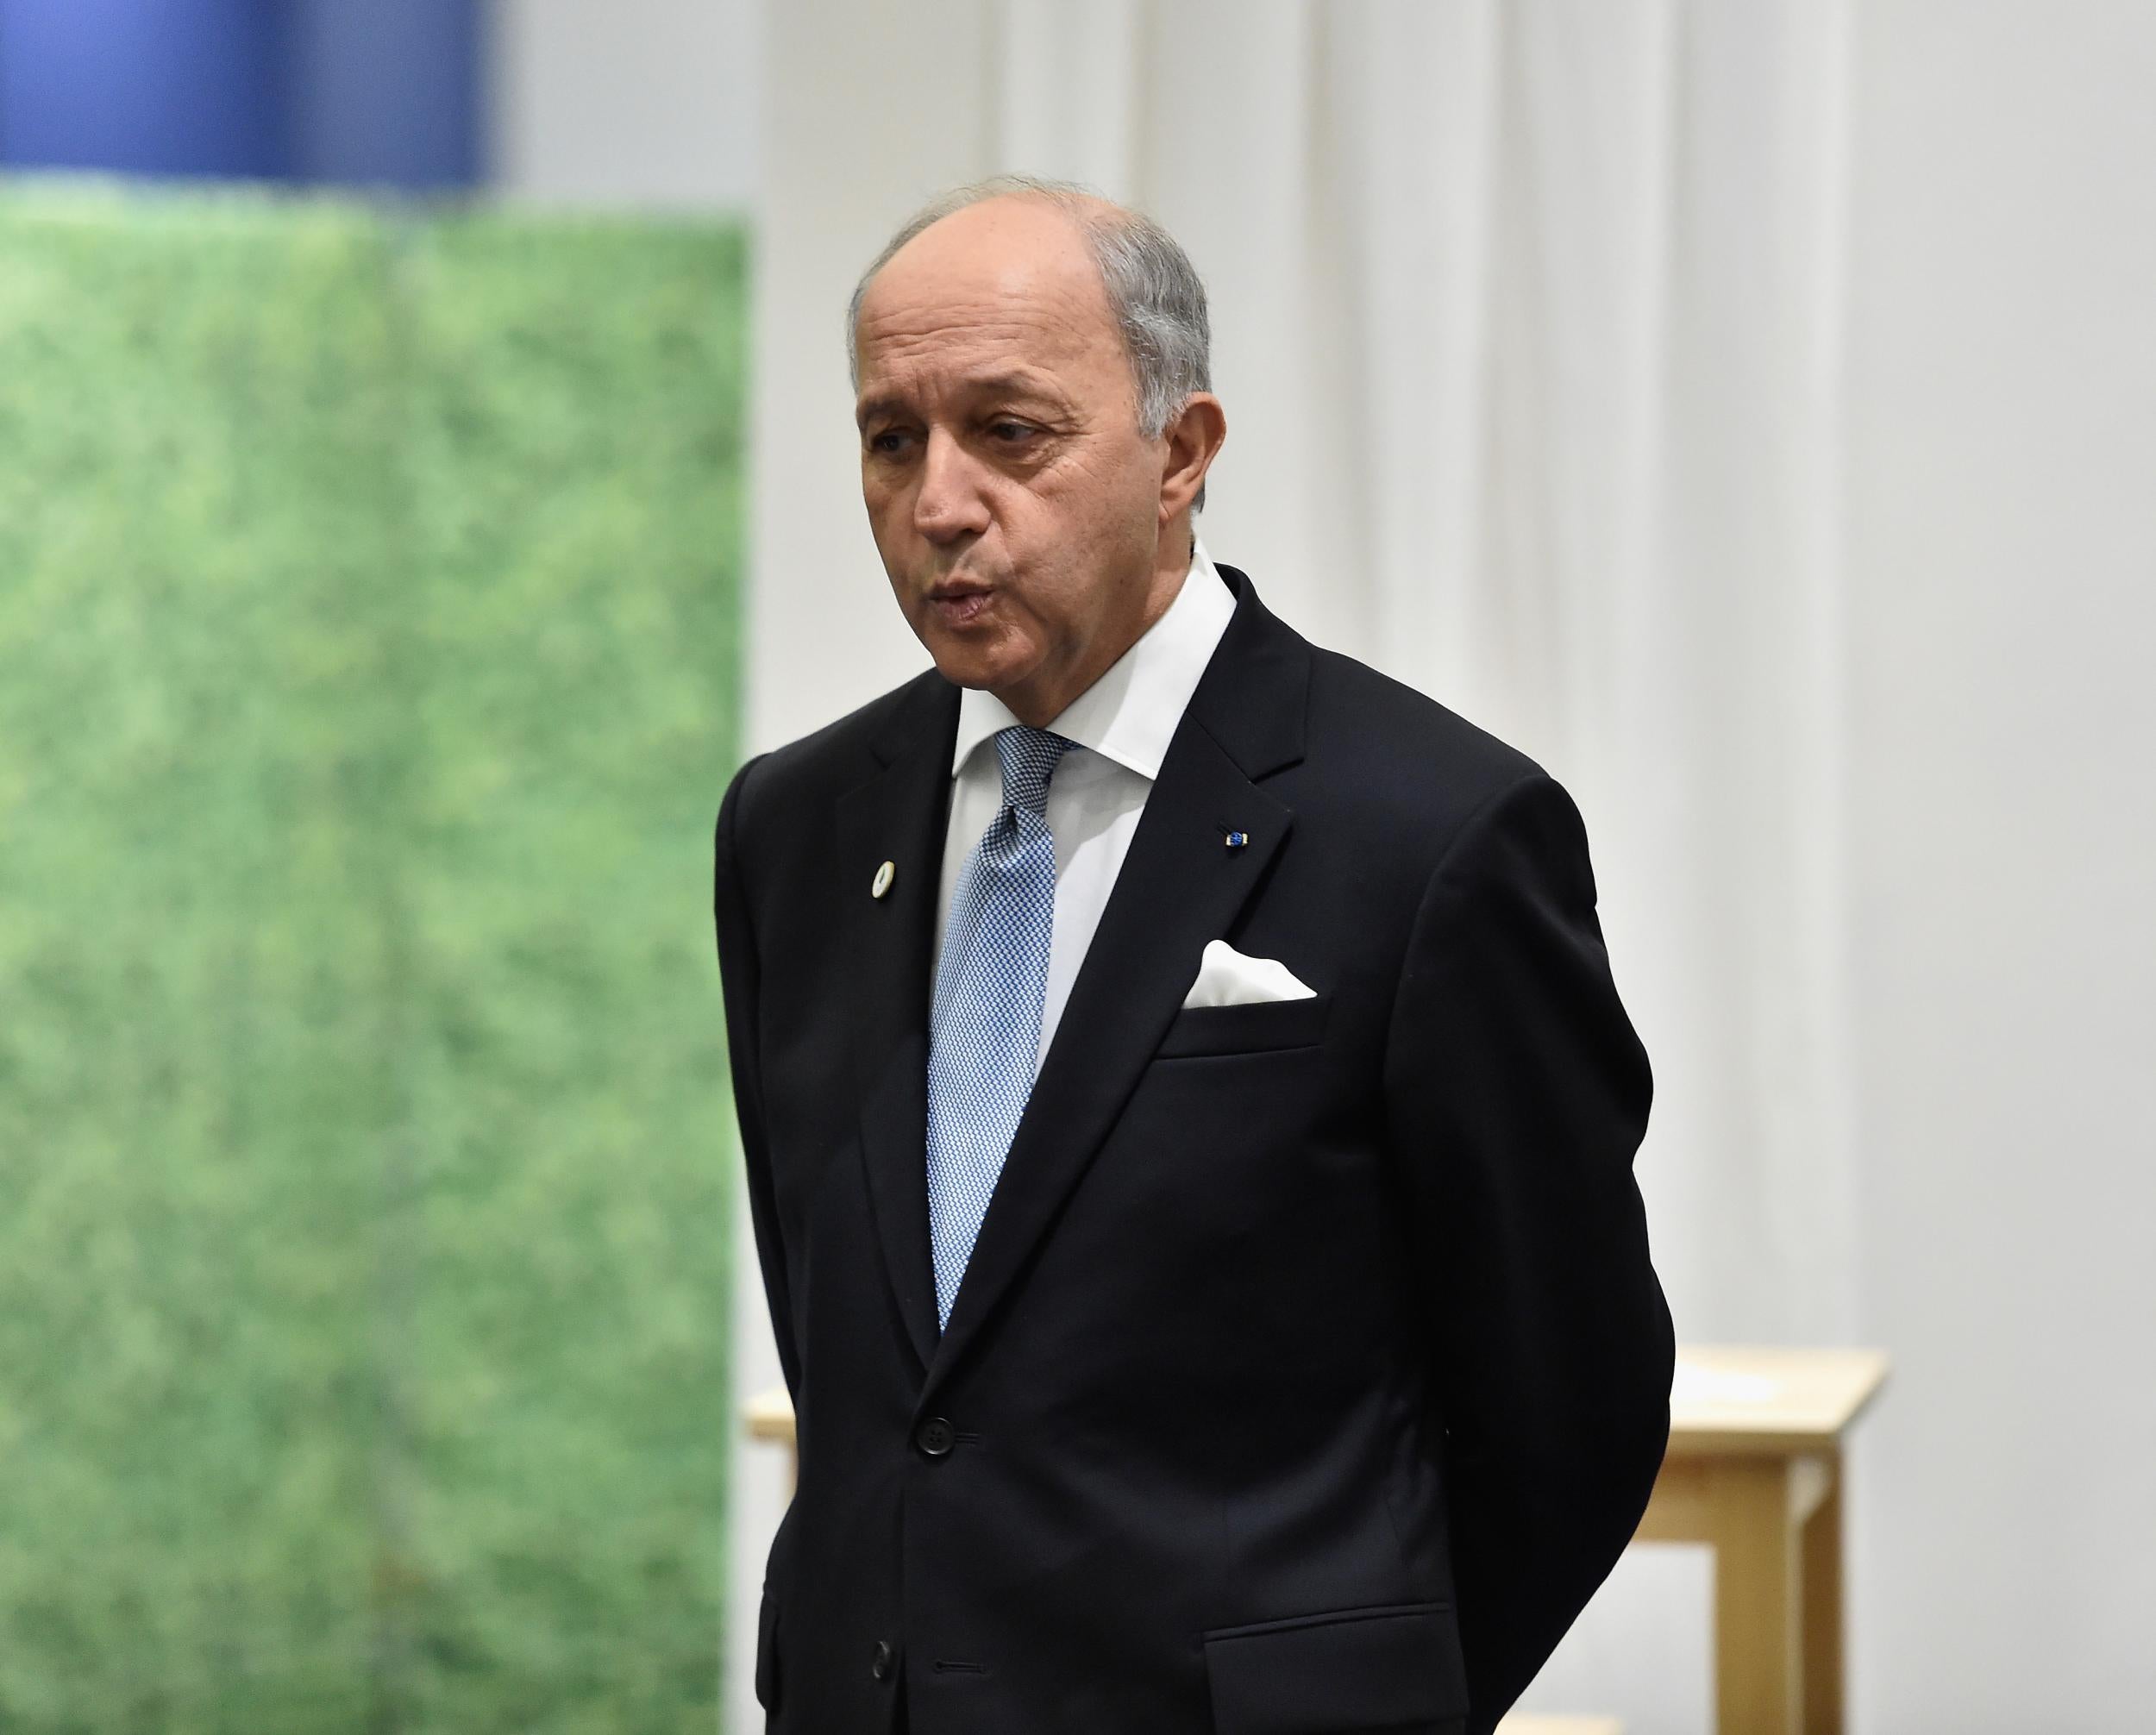 French foreign minister Laurent Fabius - who chaired the talks